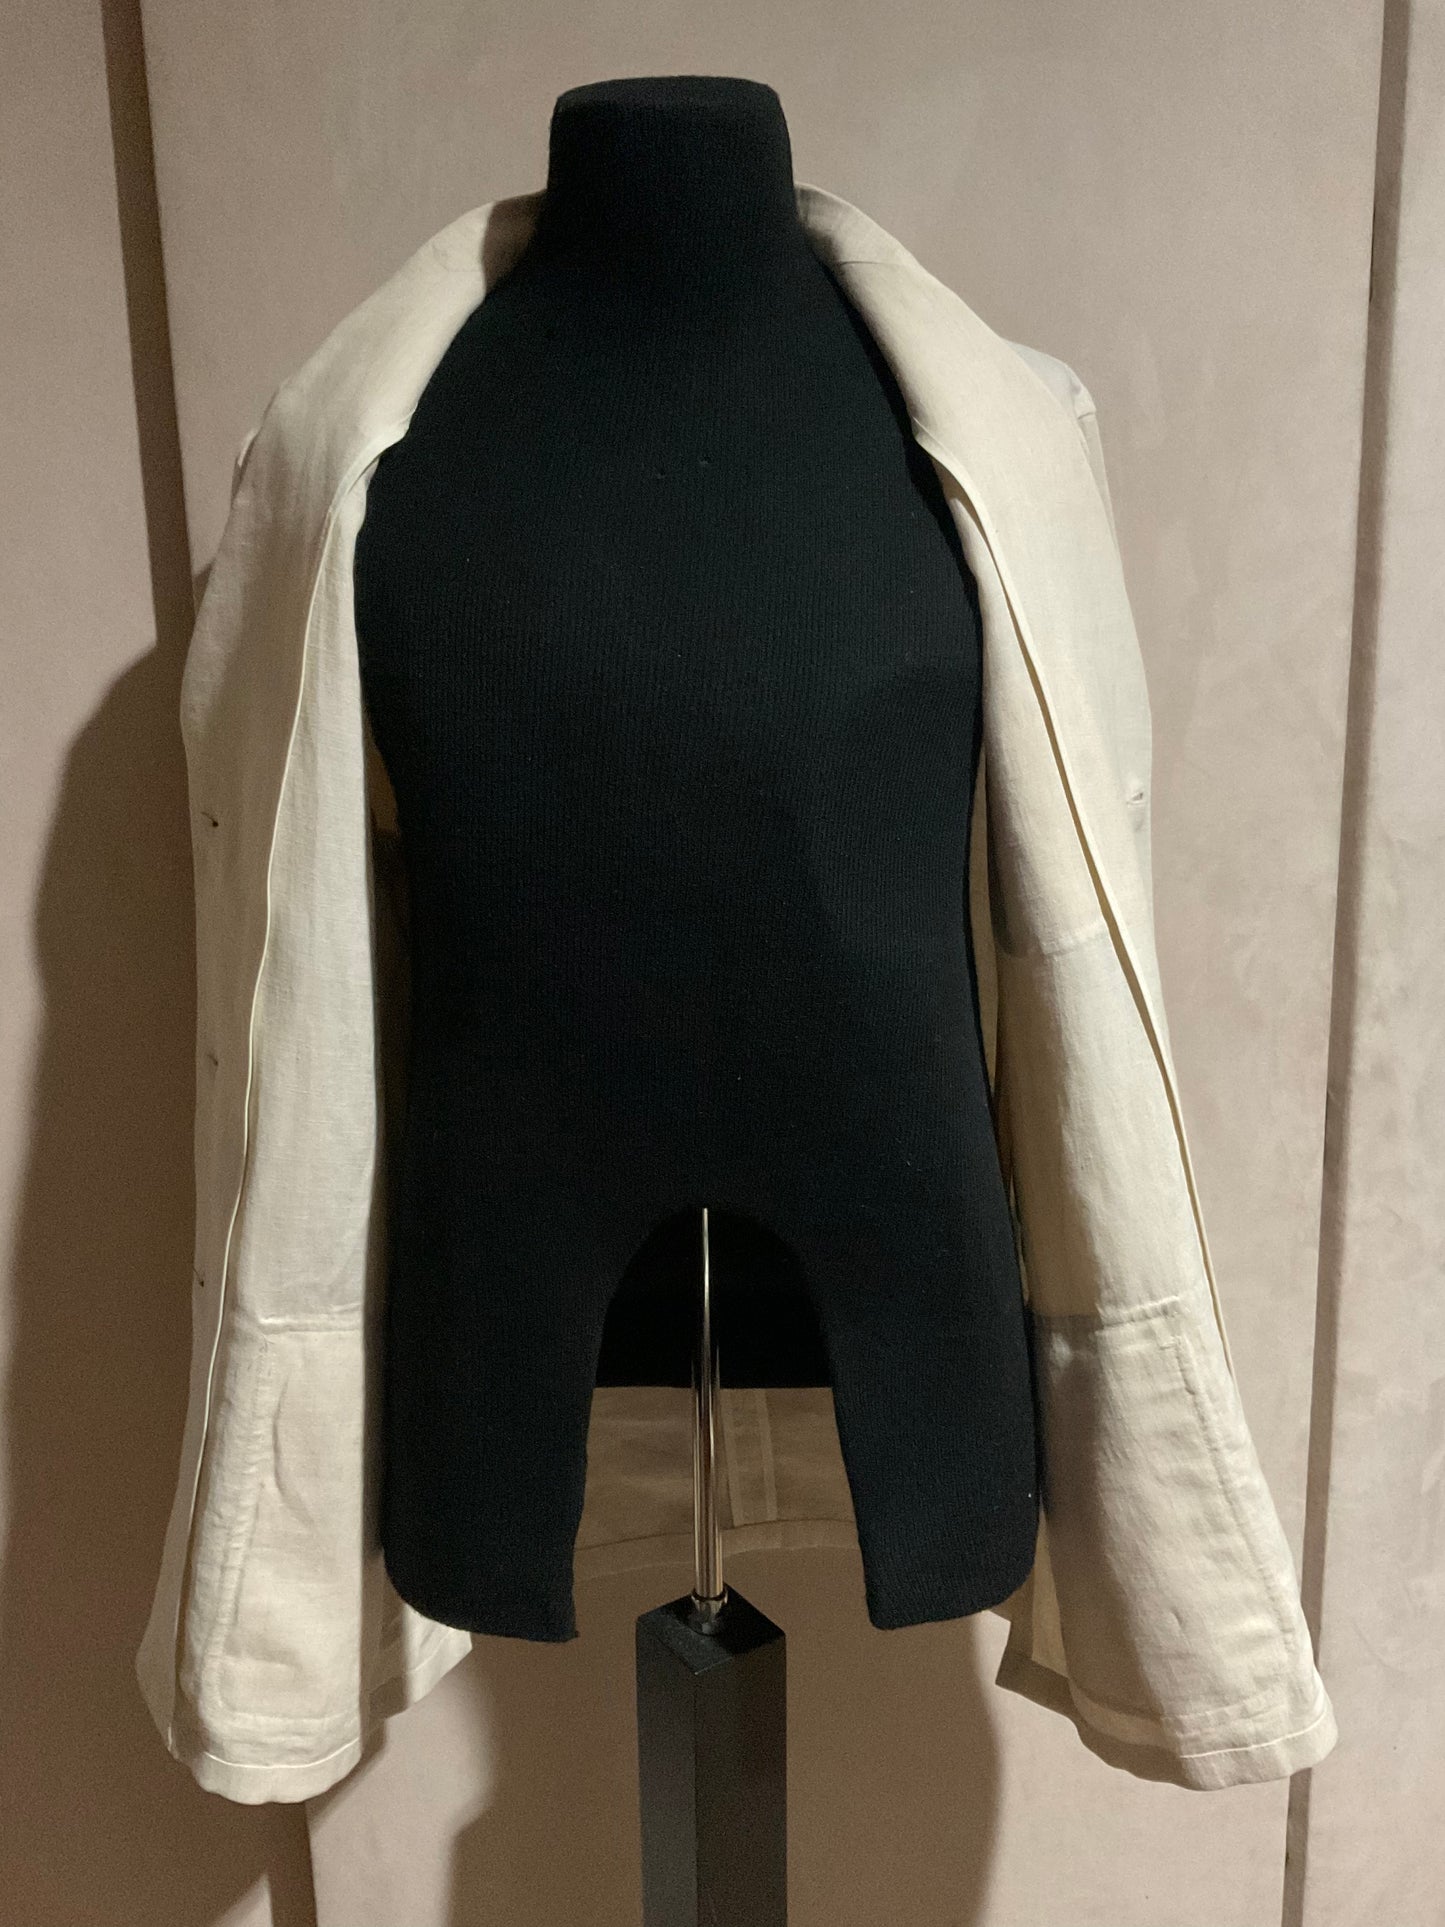 R P SPORTS JACKET / CREAM LINEN / UNCONSTRUCTED / MEDIUM - LARGE / NEW / MADE IN USA